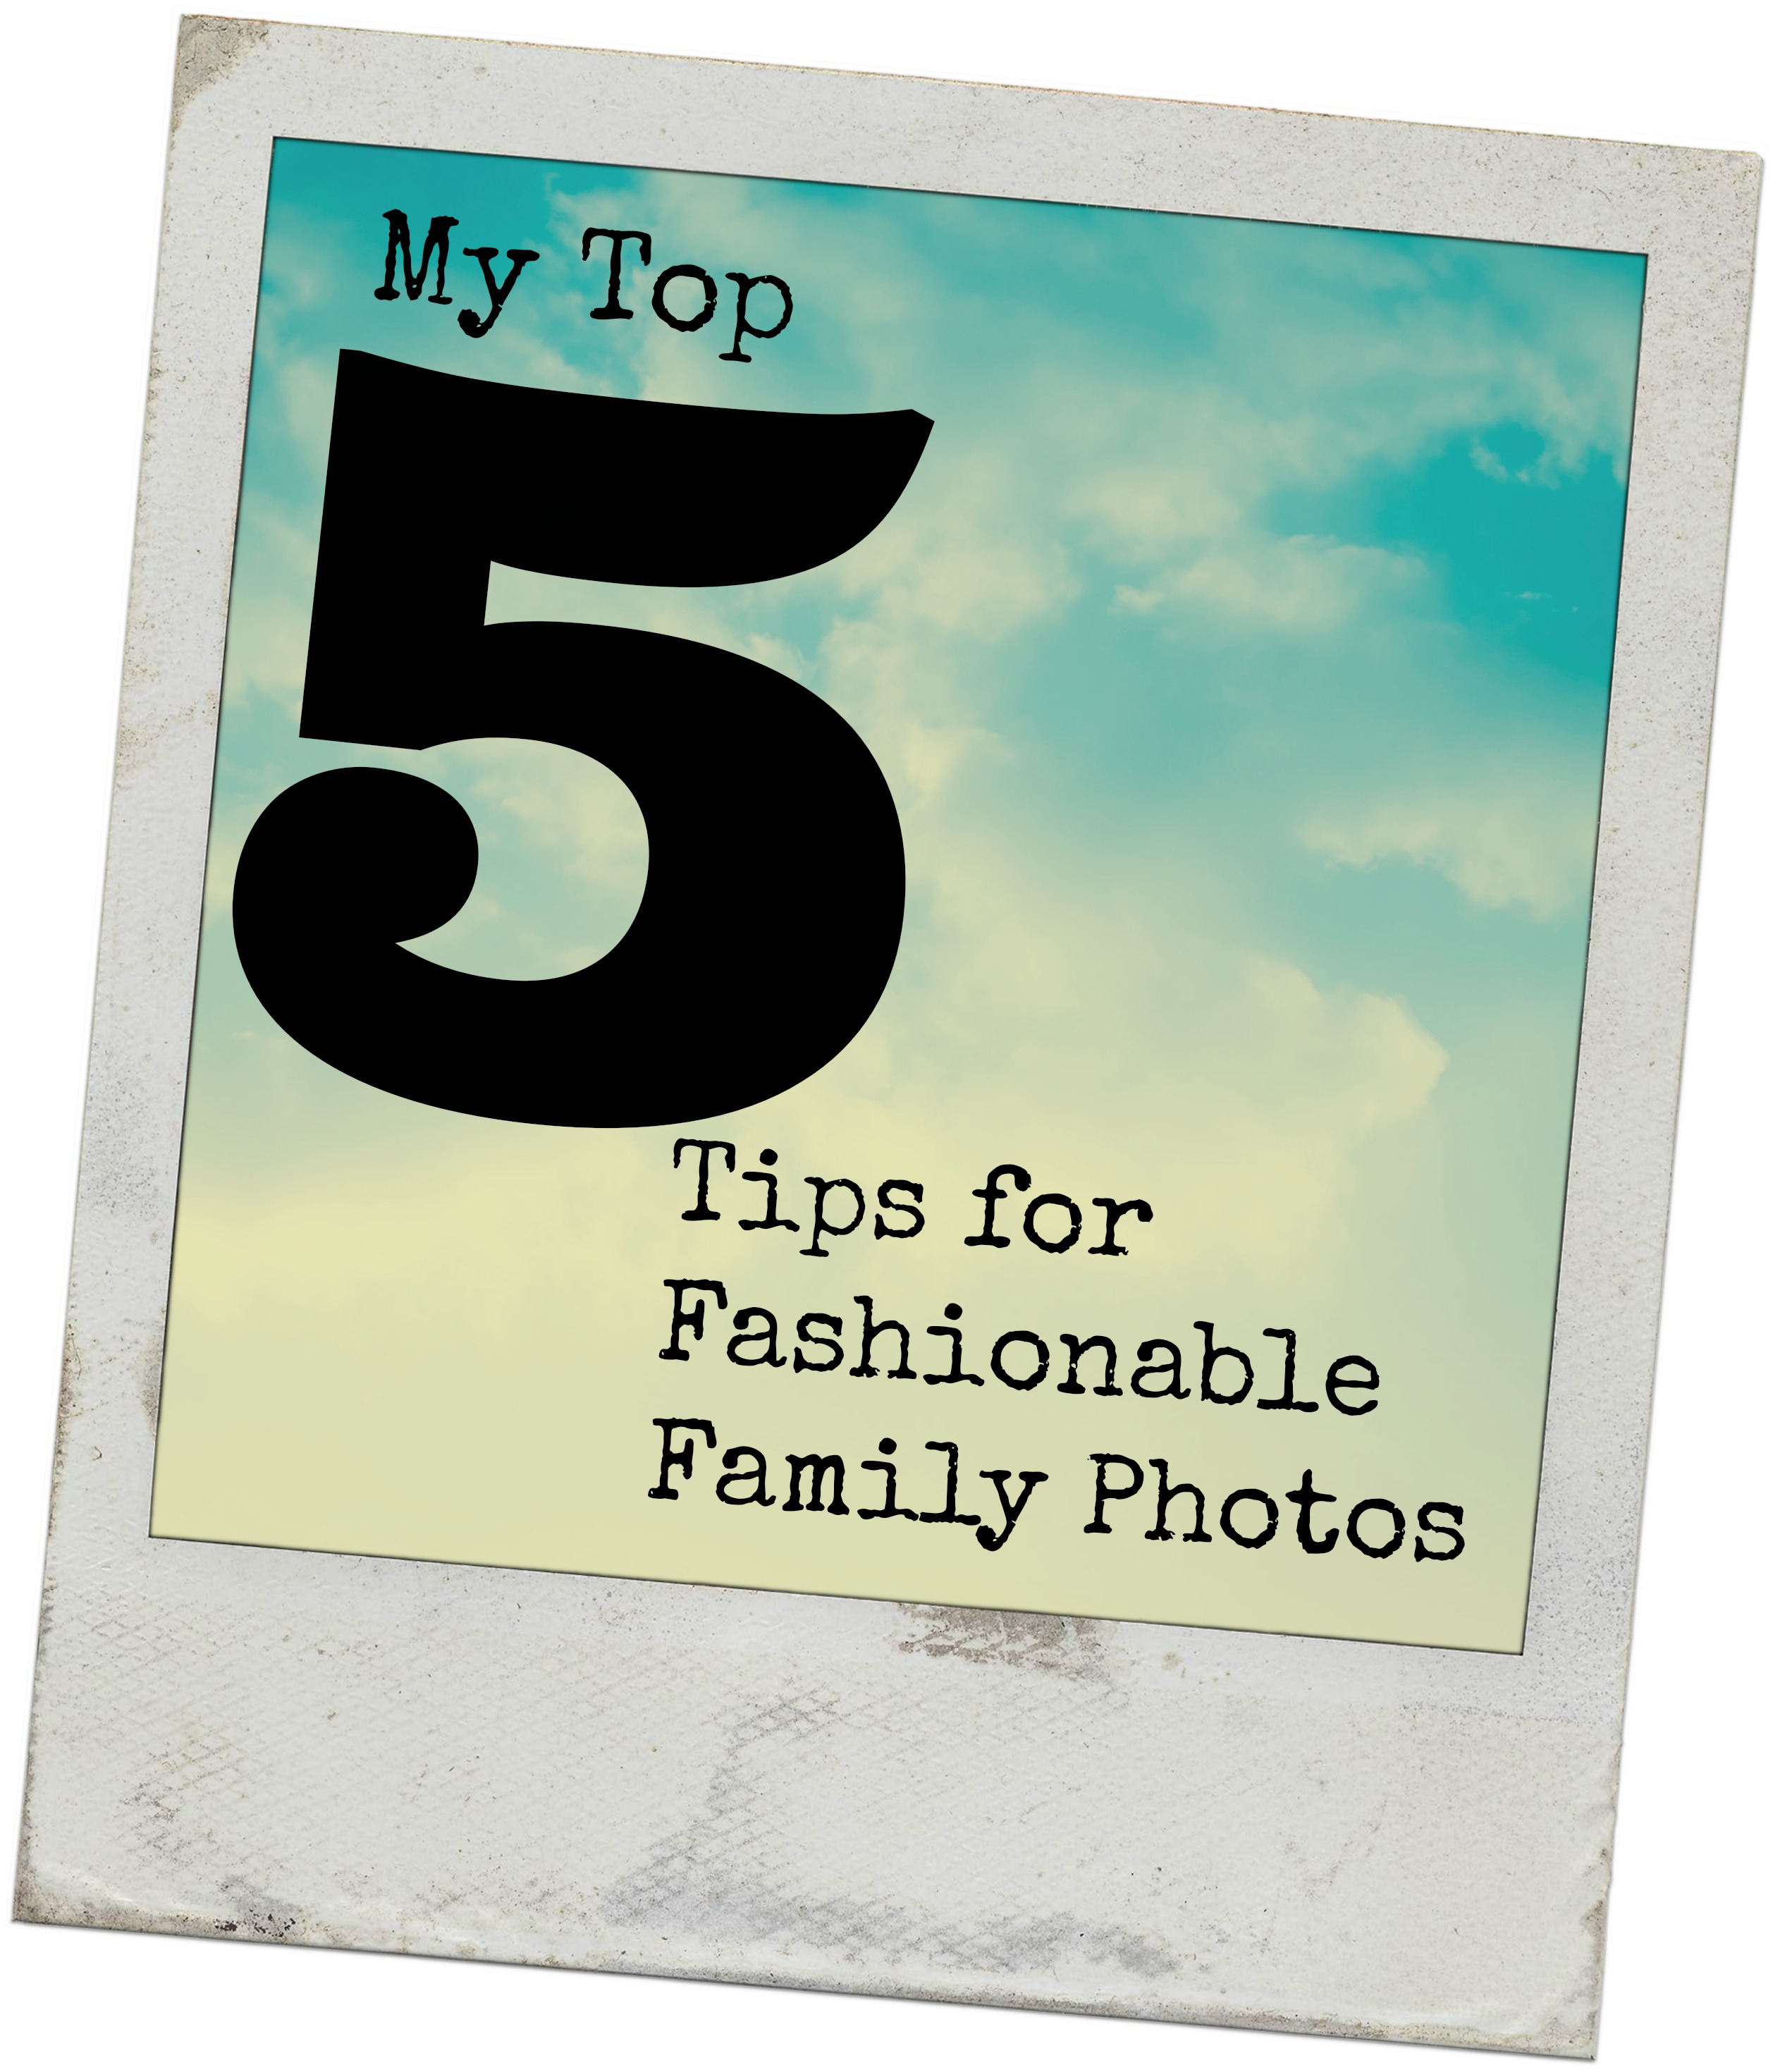 My Top 5 Tips for Fashionable Family Photos